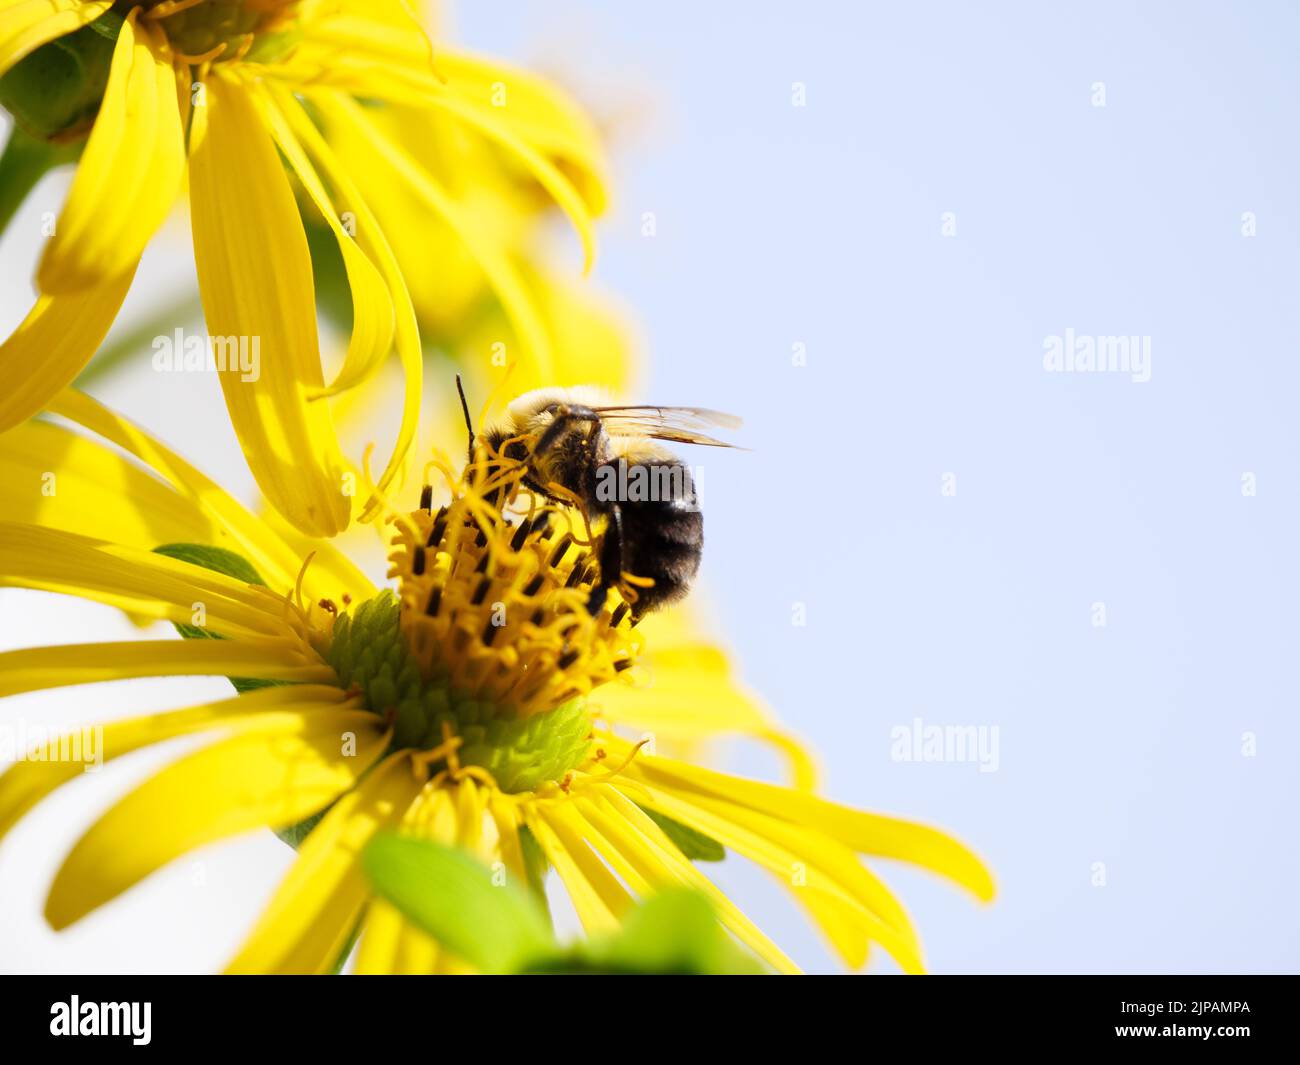 Bumble bee on cup plant flower Stock Photo - Alamy